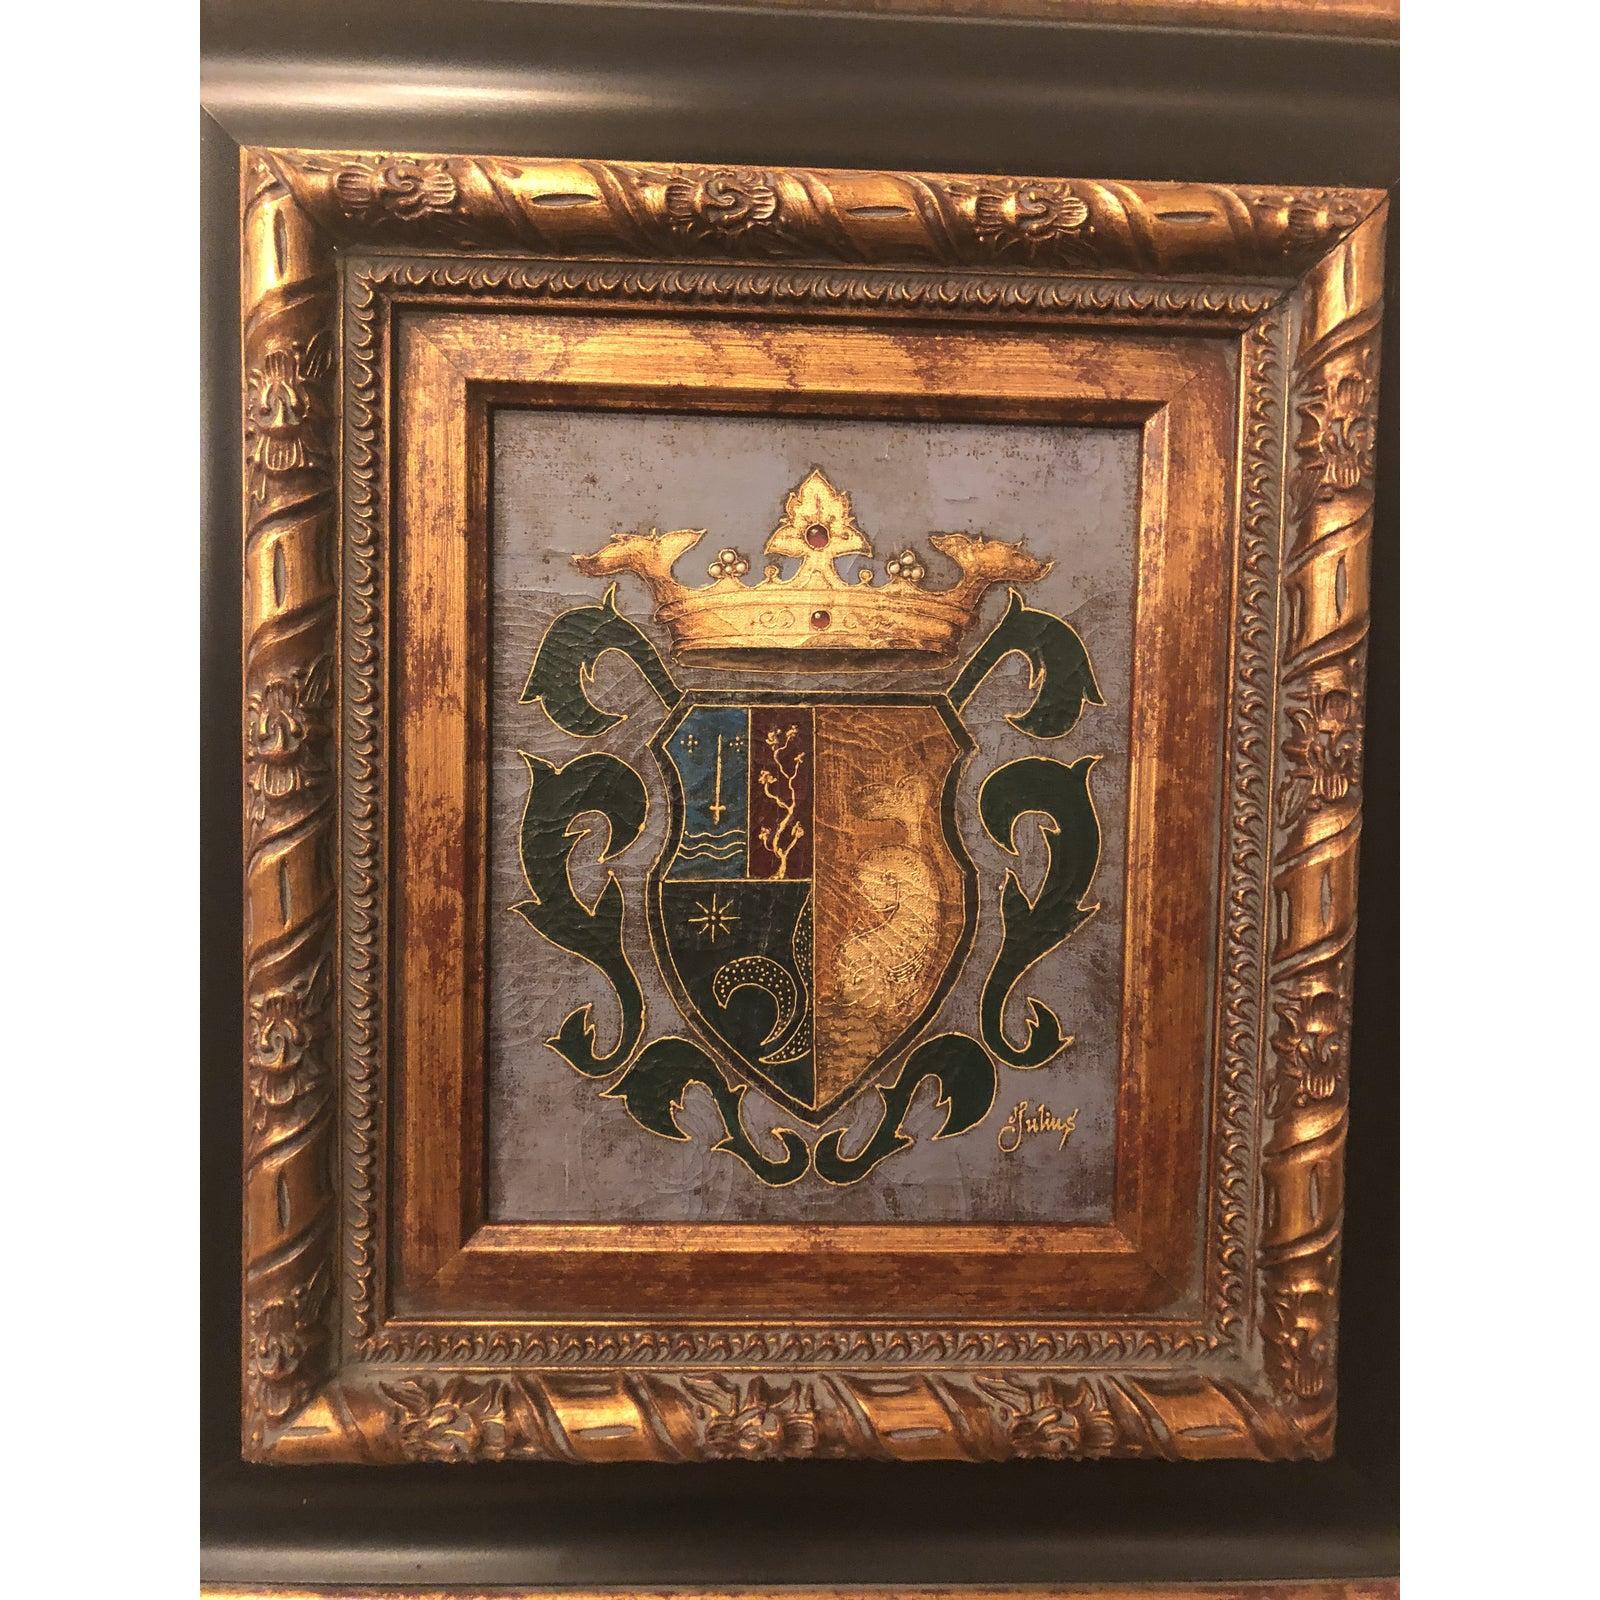 This is an oil on canvas painting depicting a shield and crown. The black and gold custom frame adds sophistication and class to this royal piece. 
The painting is signed by artist Julius 

Dimensions:
Framed 21